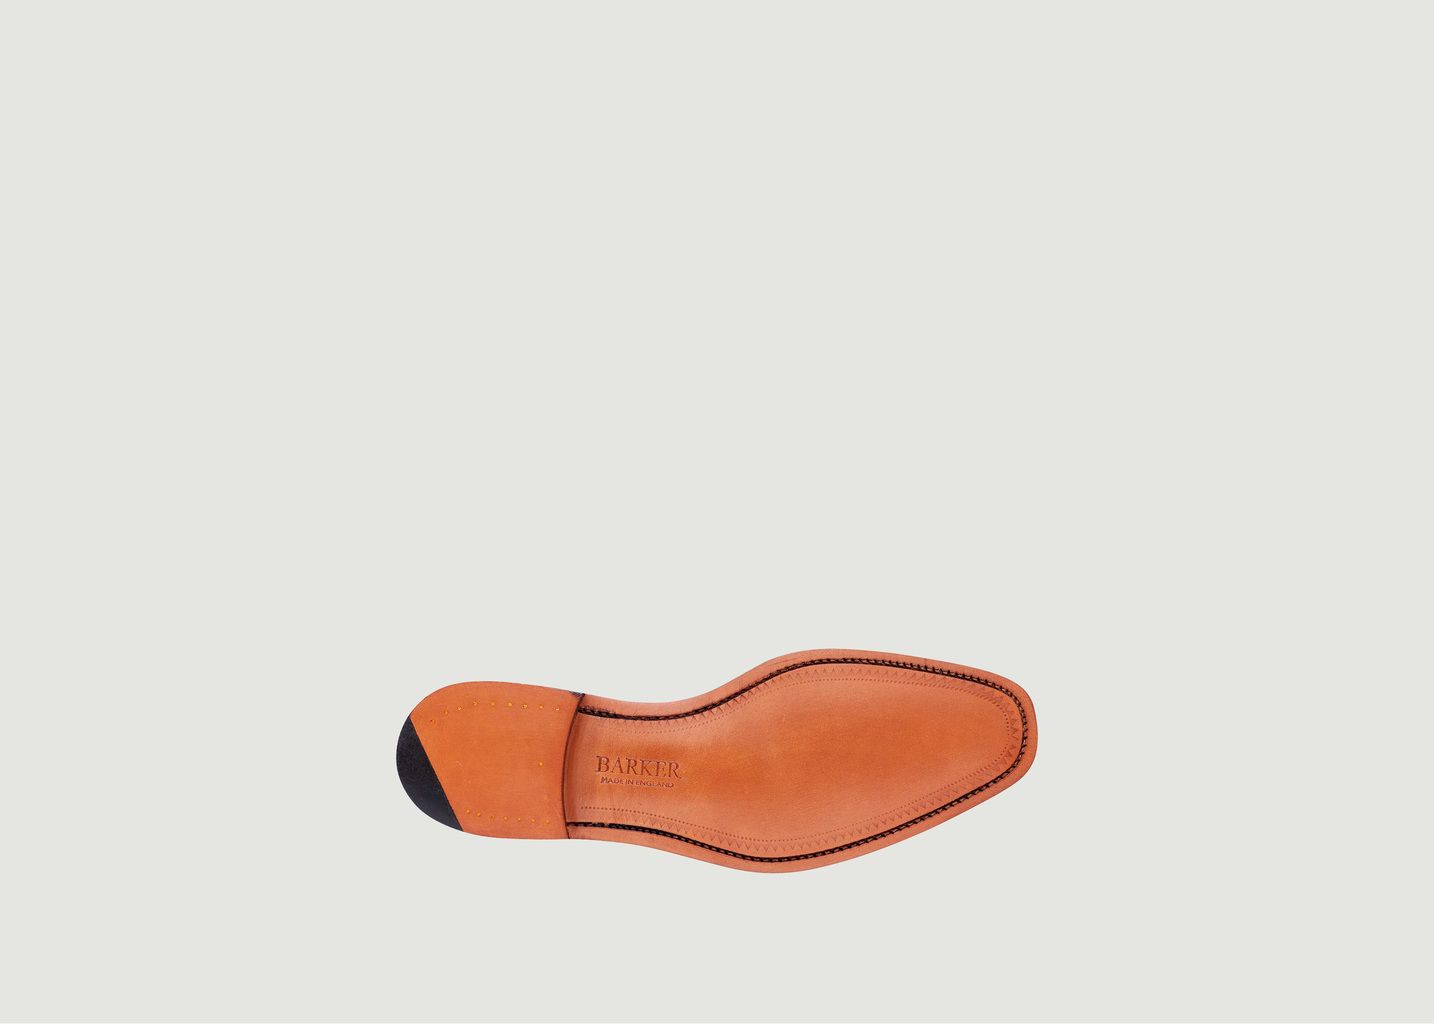 Caruso Loafers - Barker Shoes